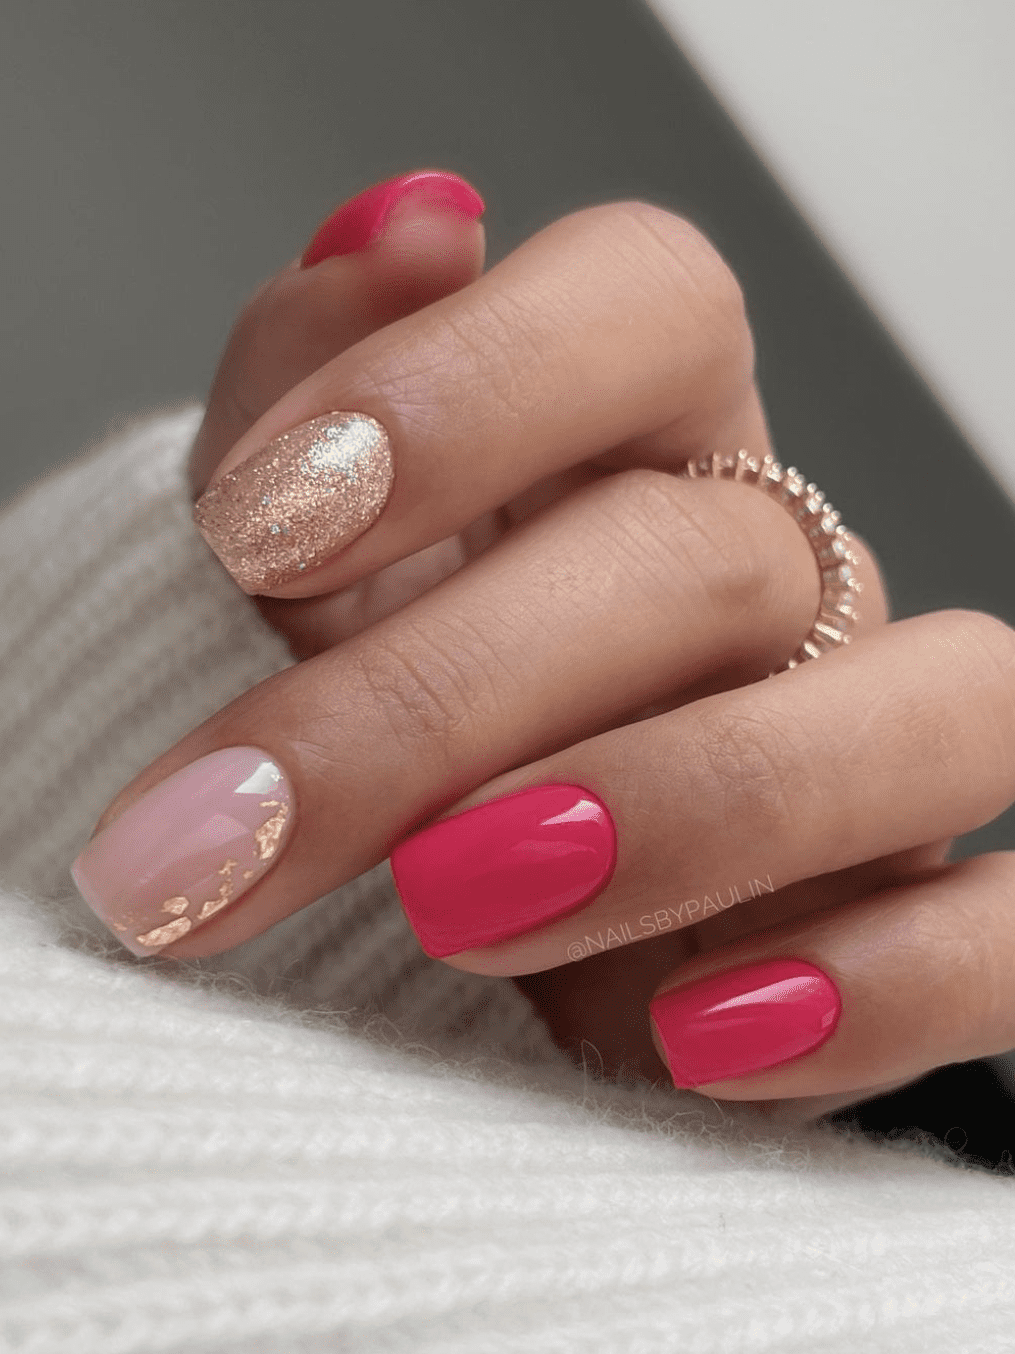 A hand with short square nails painted in a bright pink nail polish and accent nails with nude pink polish and gold flakes and solid gold glitter